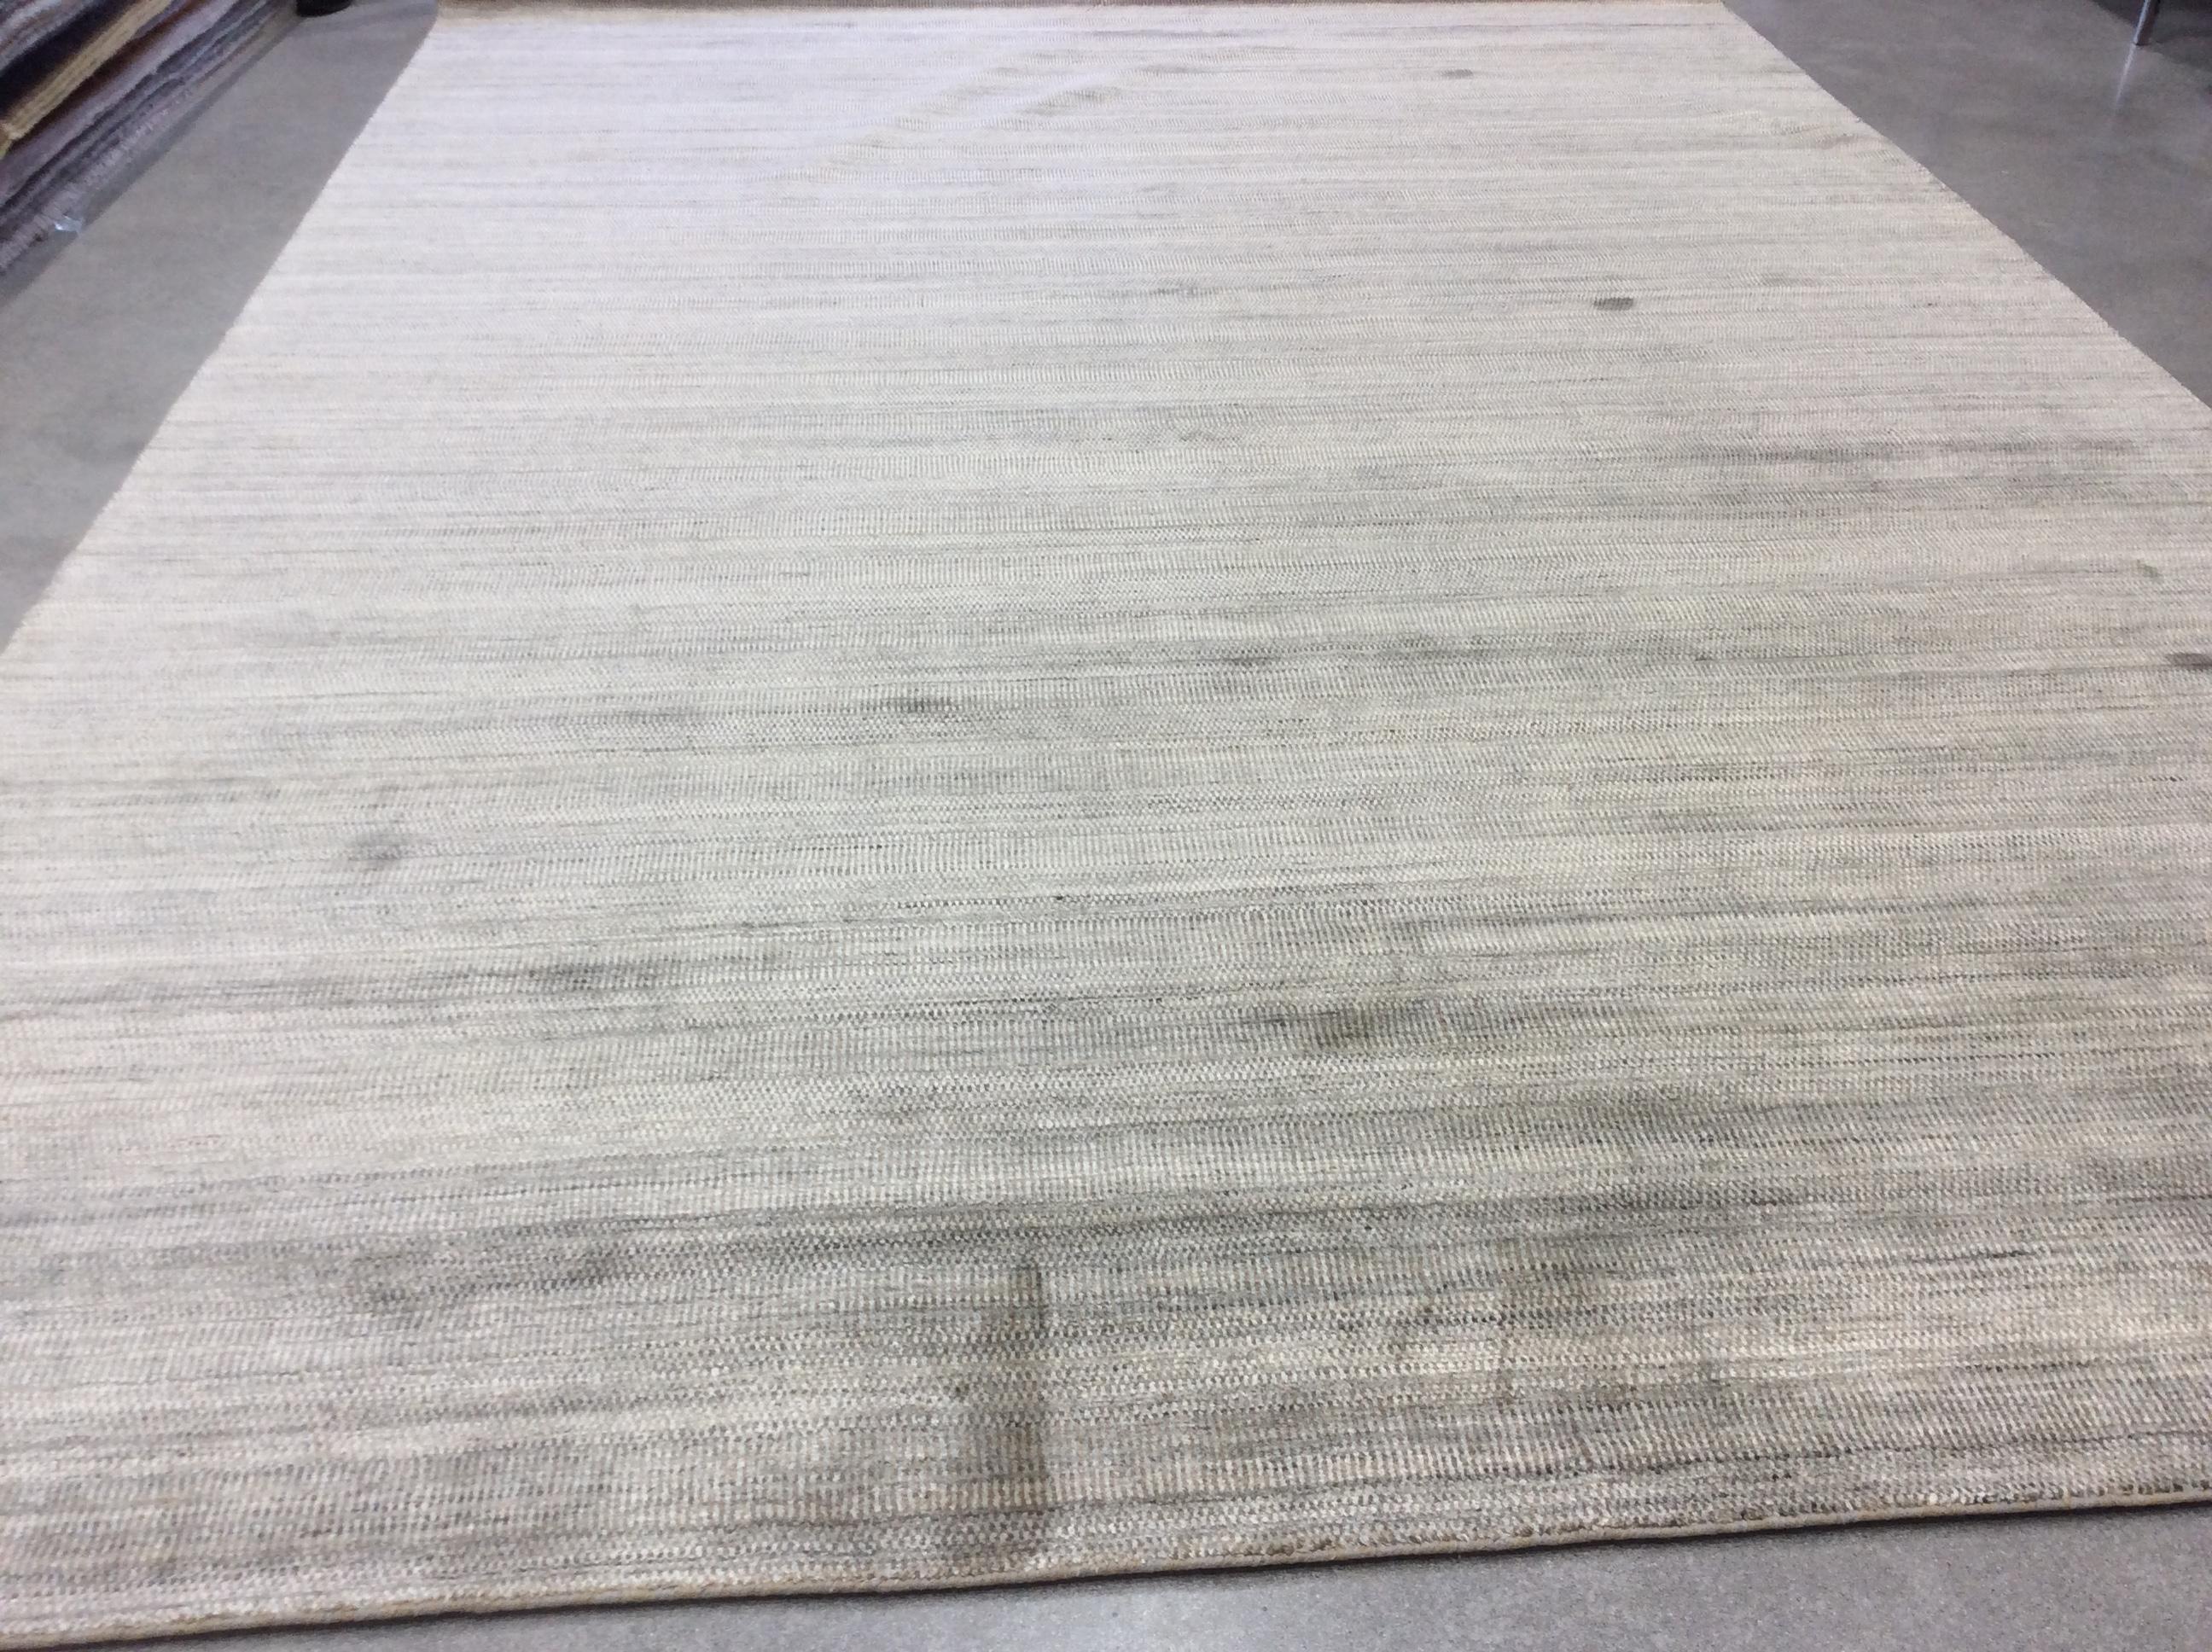 Create a calming atmosphere in any space with this cool beige and silver variation of the popular Zen Collection rugs.  Wool/viscose blend for comfort and durability.  Hand knotted in India.  Made using natural vegetal dyes.  

Additional sizes